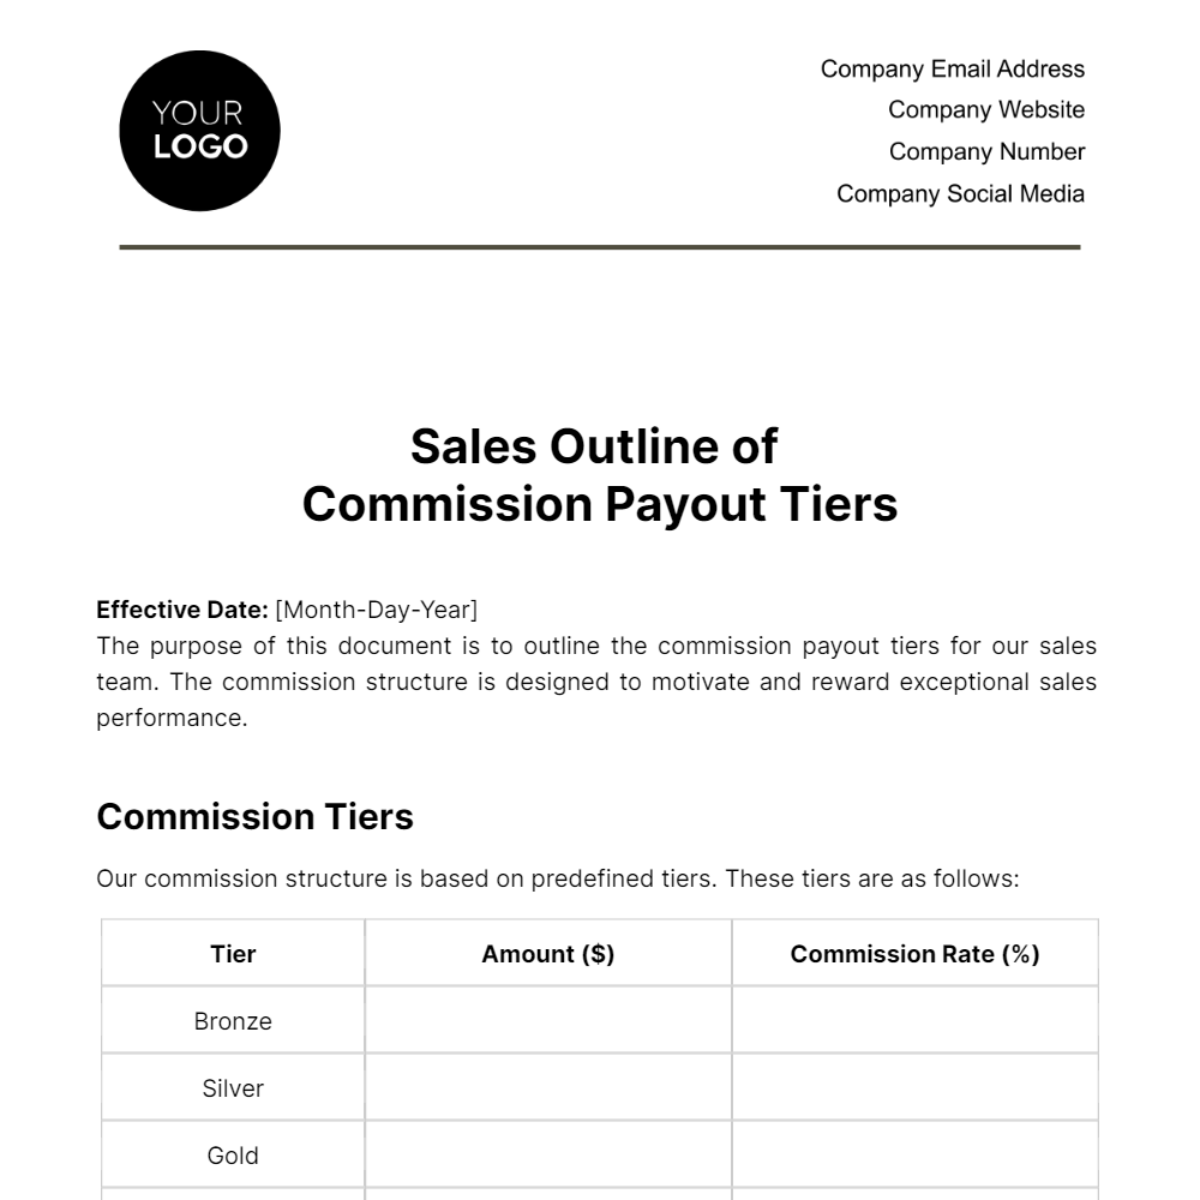 Sales Outline of Commission Payout Tiers Template